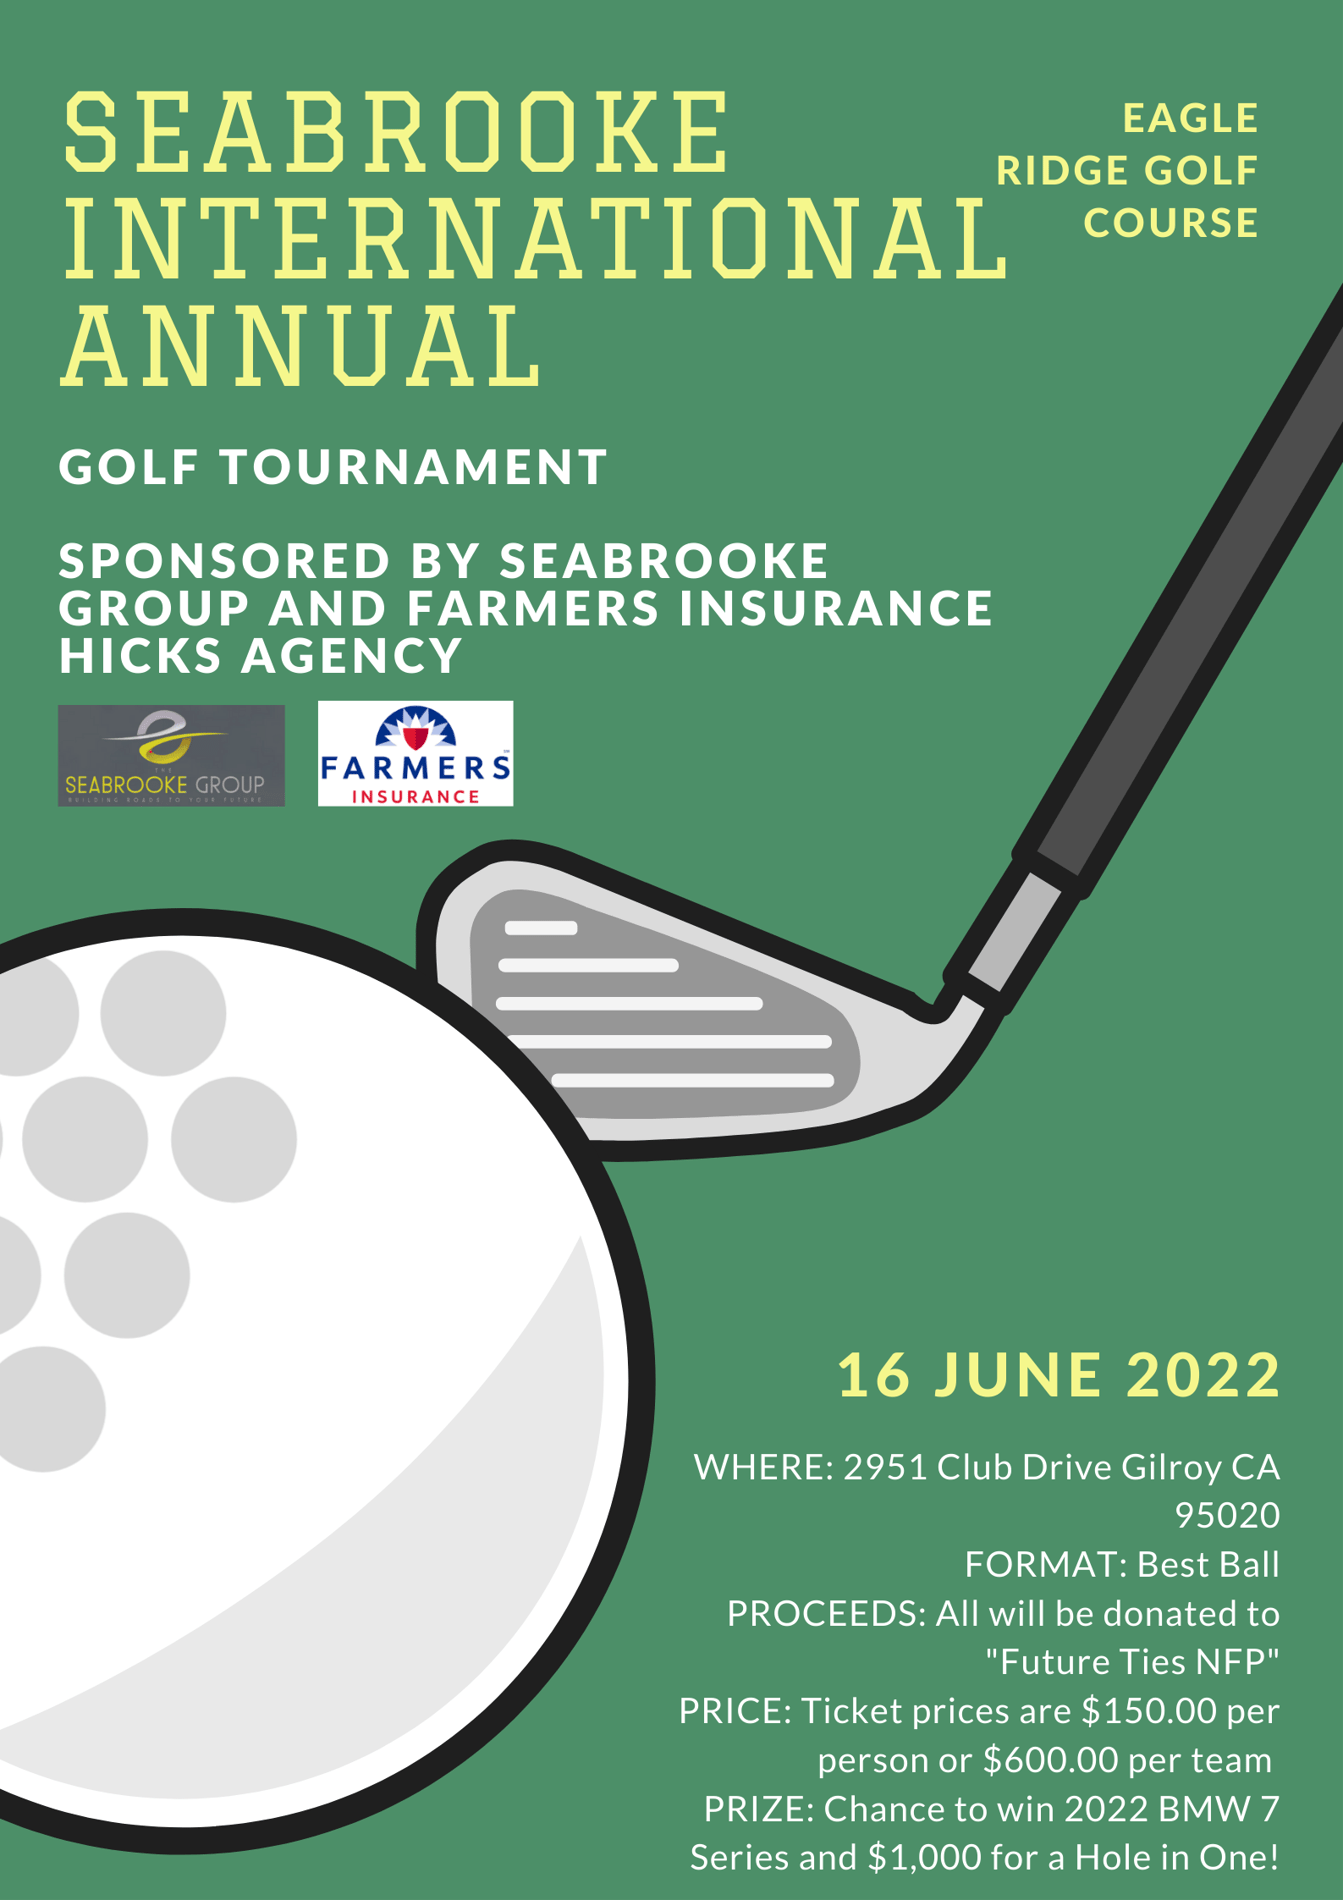 The Seabrooke Group and Farmers Hicks Agency First Annual Golf Tournament